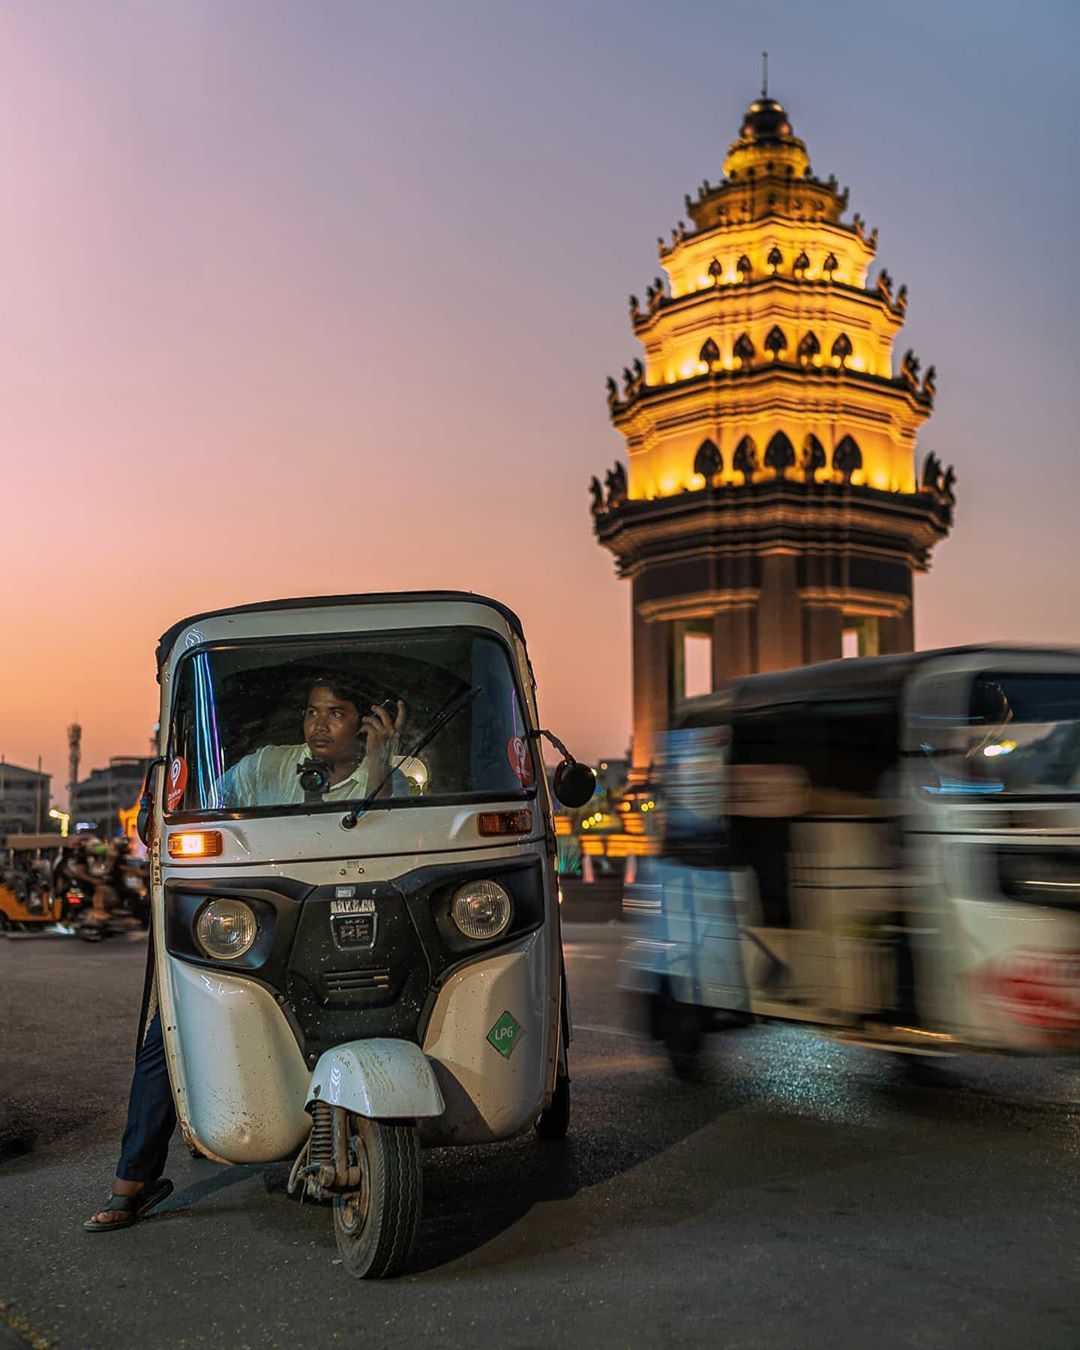 A photograph of Cambodia’s Independence monument as a local Pass App and Grab Tuk Tuk/taxi driver waits for a customer in the busy Valentine’s Day traffic.